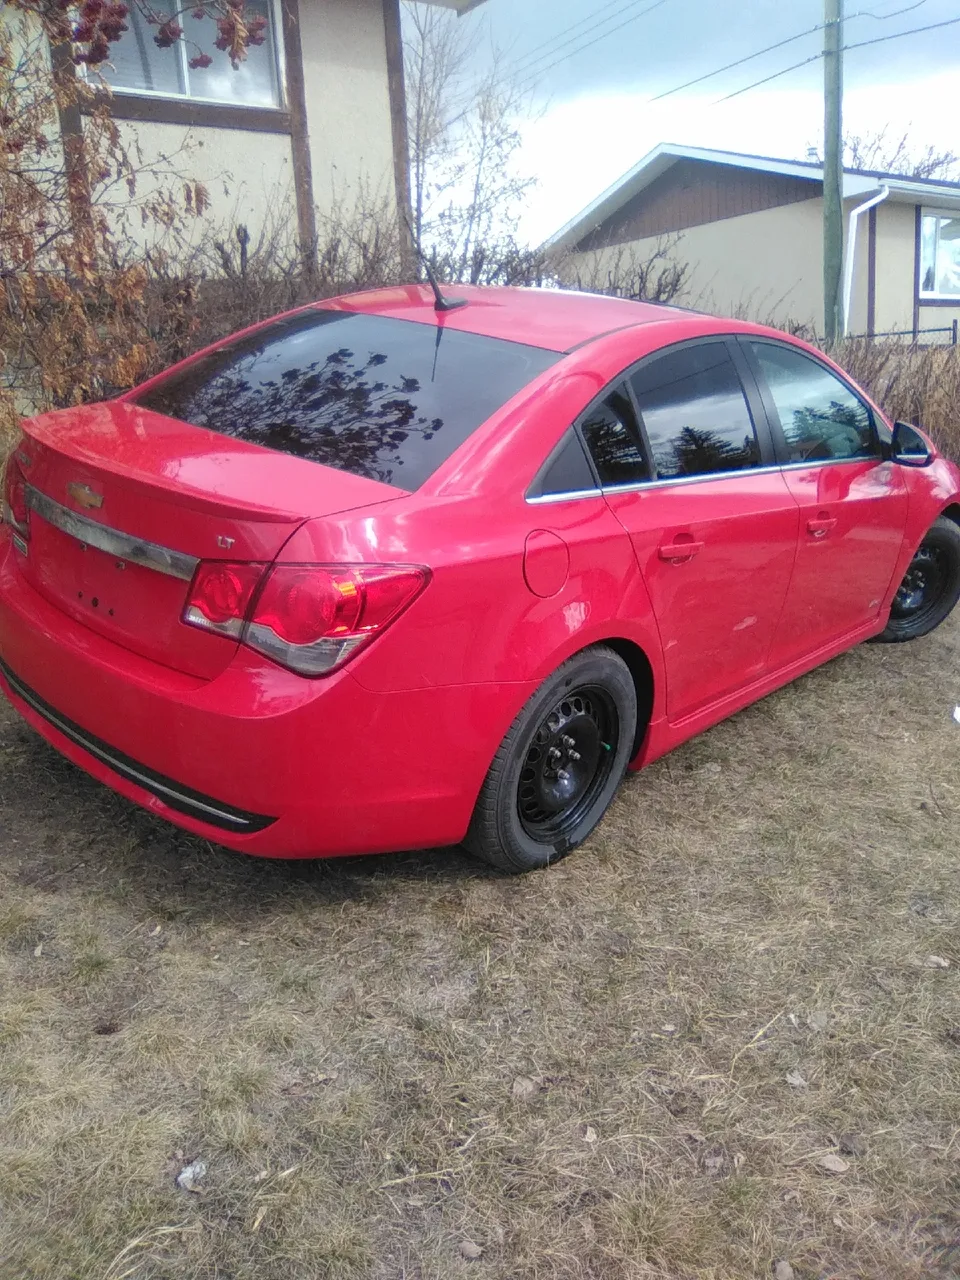 Chevy Cruze RS for sale price drop!!!